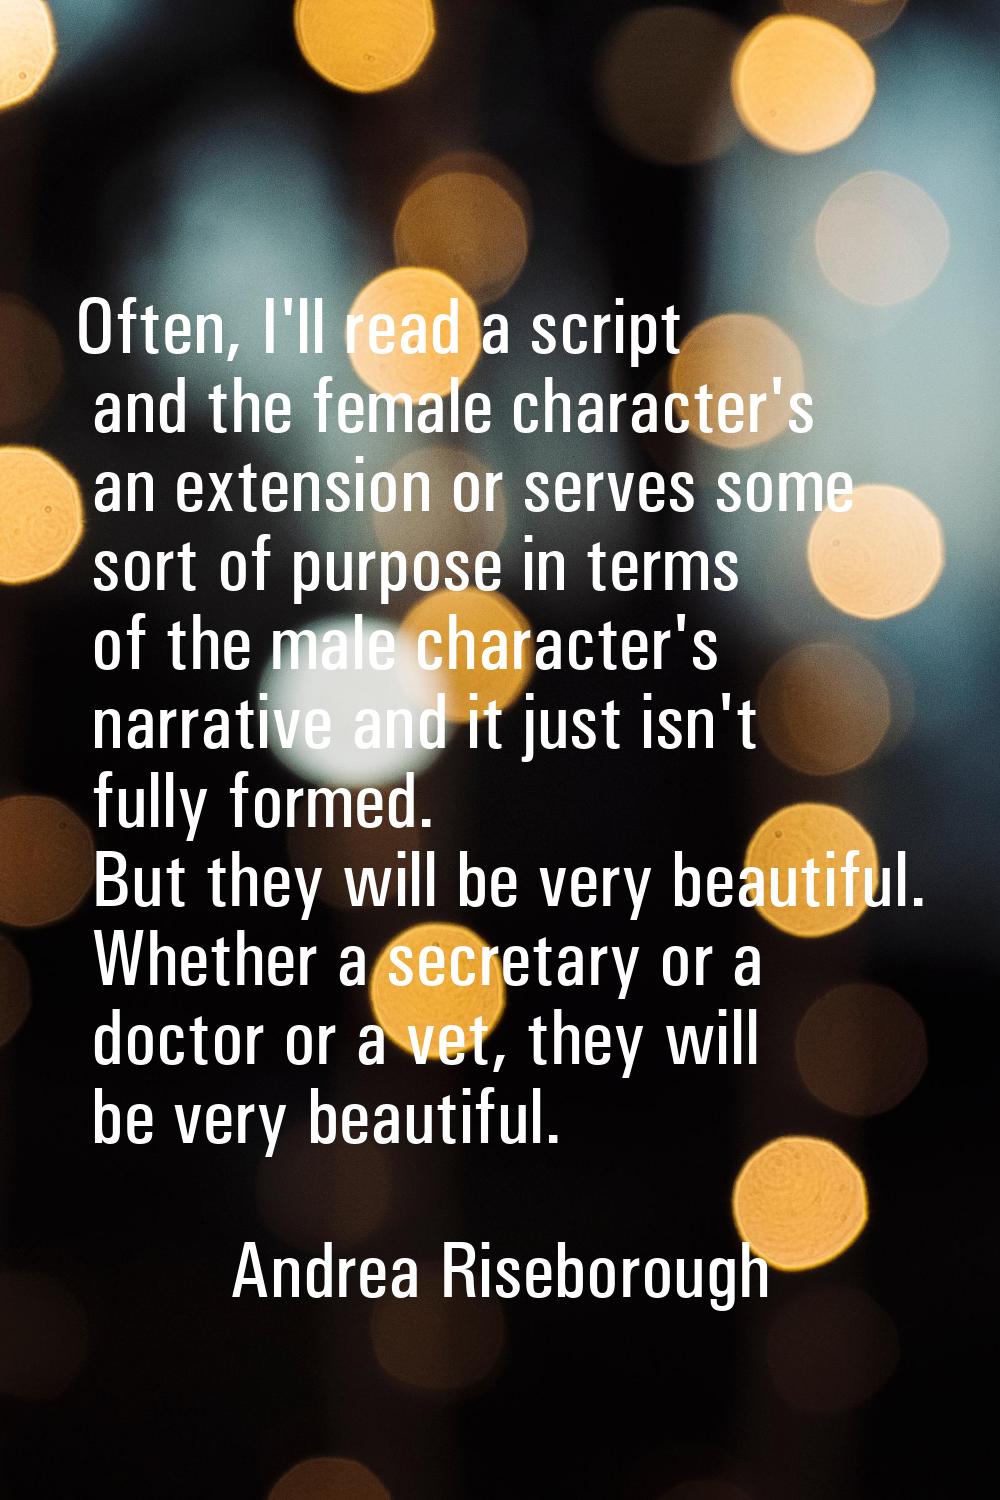 Often, I'll read a script and the female character's an extension or serves some sort of purpose in